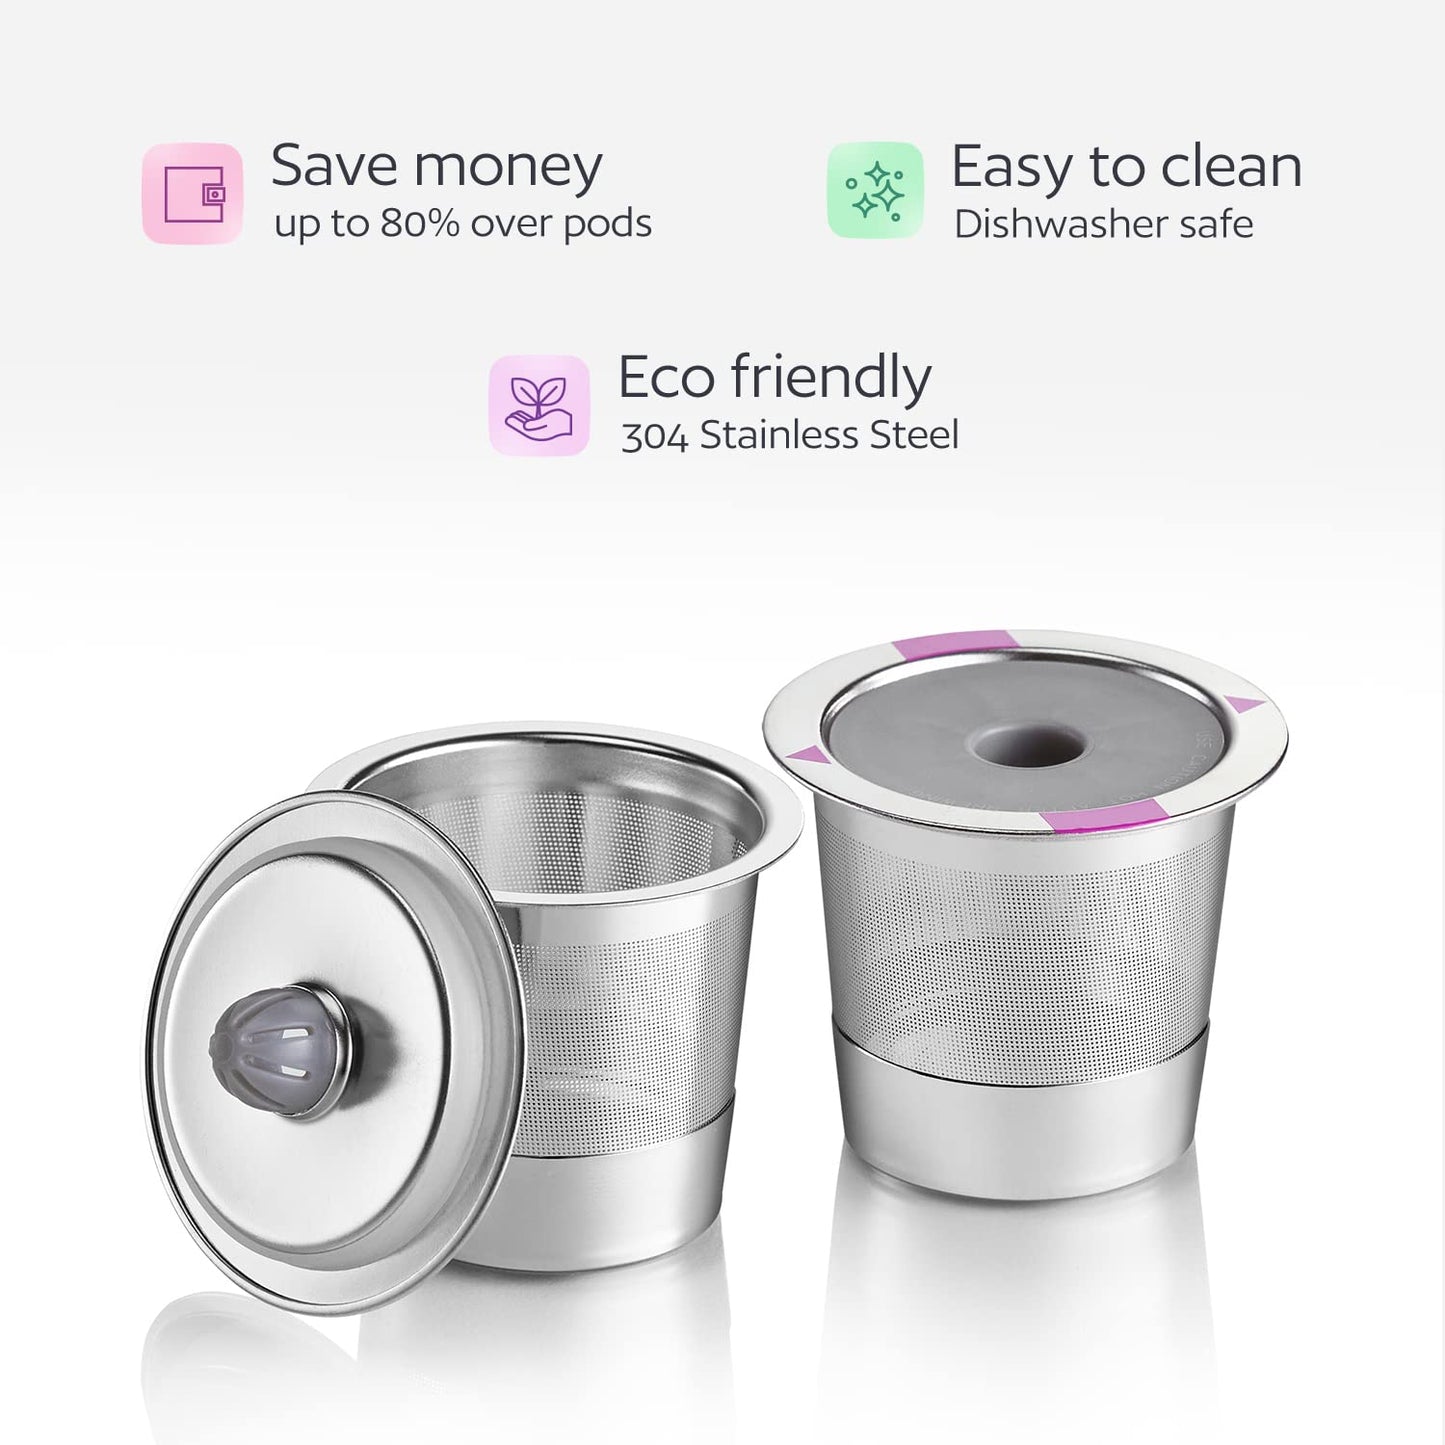 2 Stainless Steel Reusable K Cups for Keurig Coffee Makers - Universal Compatible Refillable Kcups Coffee Filters for all Keurig Brewers Family